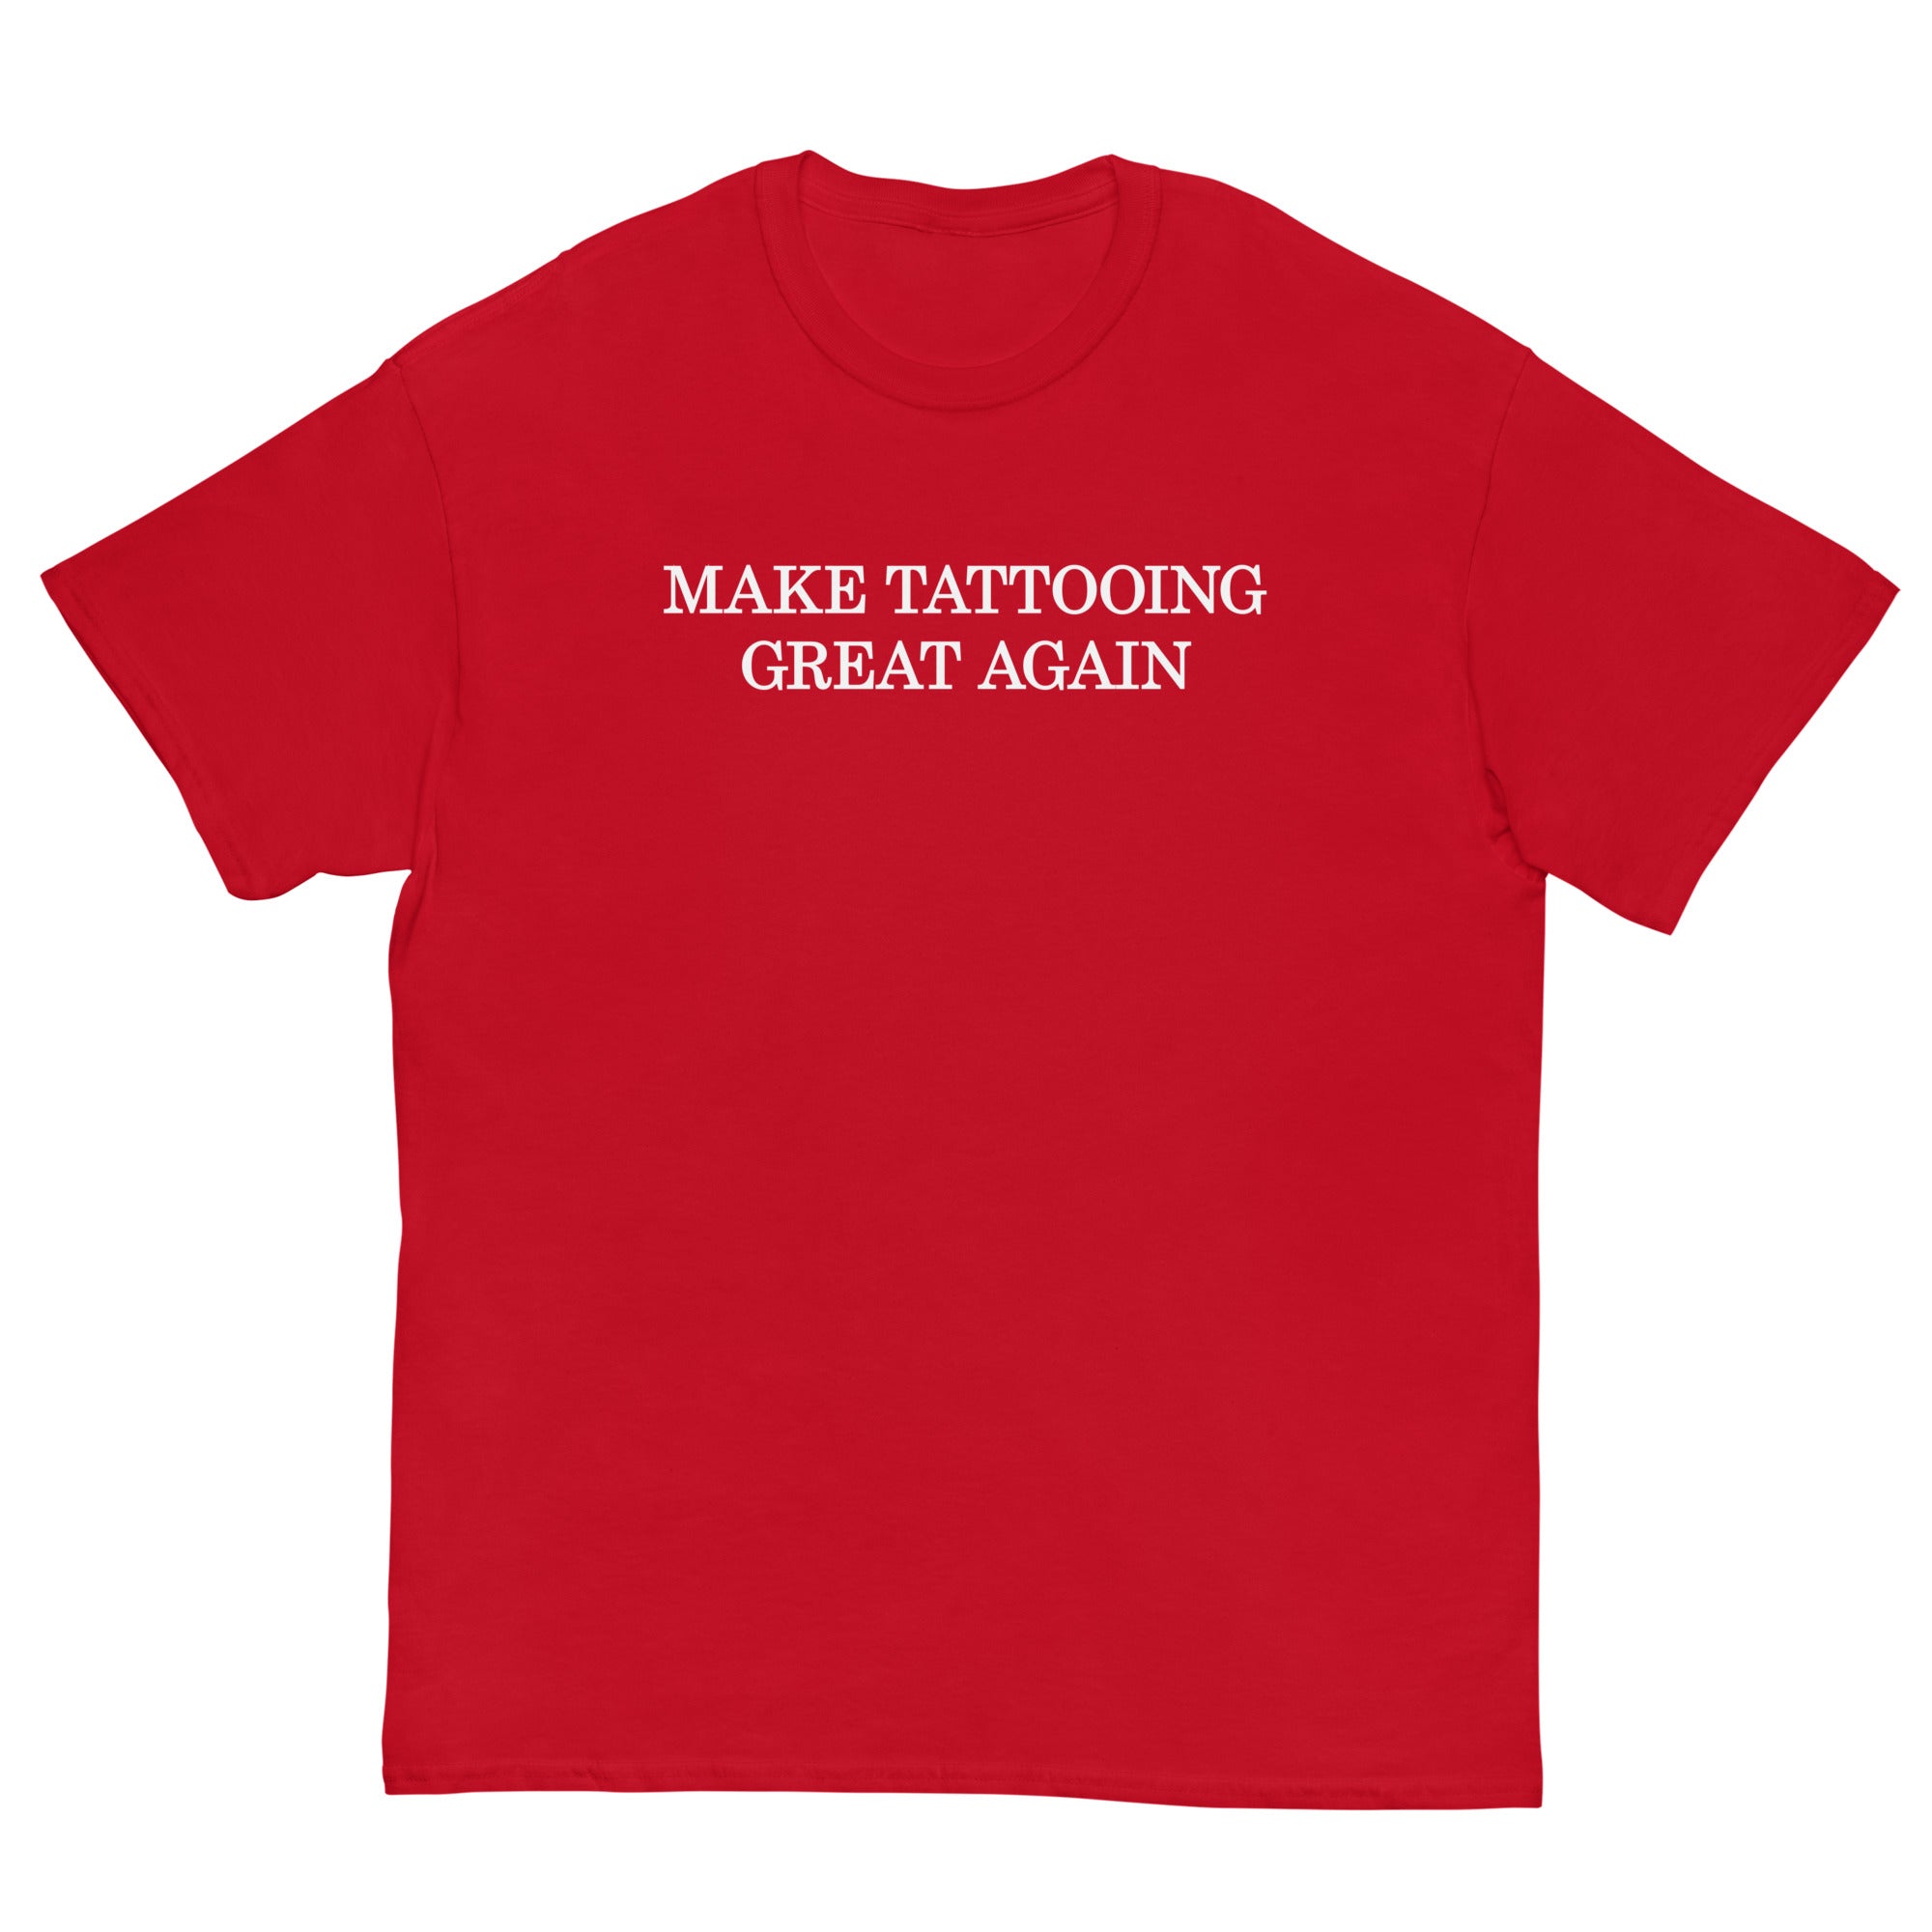 MAKE TATTOOING GREAT AGAIN Men's classic tee